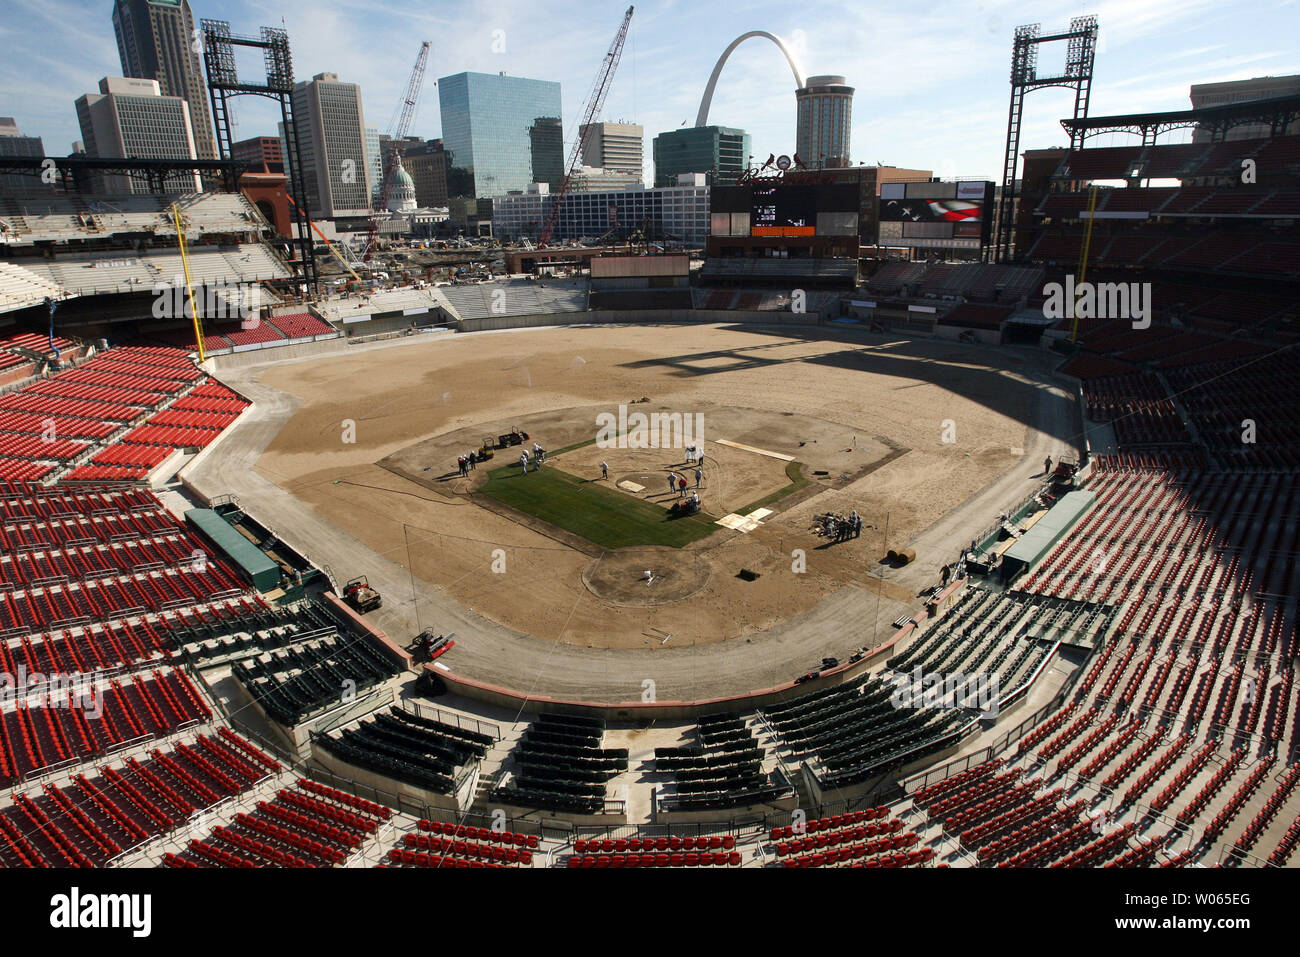 Grounds crew members lay sod grass on the infield of the new Busch Stadium in St. Louis on March 15, 2006. Nearly 20 truckloads of sod from Fort Morgan, CO will cover the Busch Stadium playing surface, about 100 thousand square feet. The Cardinals will play their first game in the new facility on April 10. (UPI Photo/Bill Greenblatt) Stock Photo